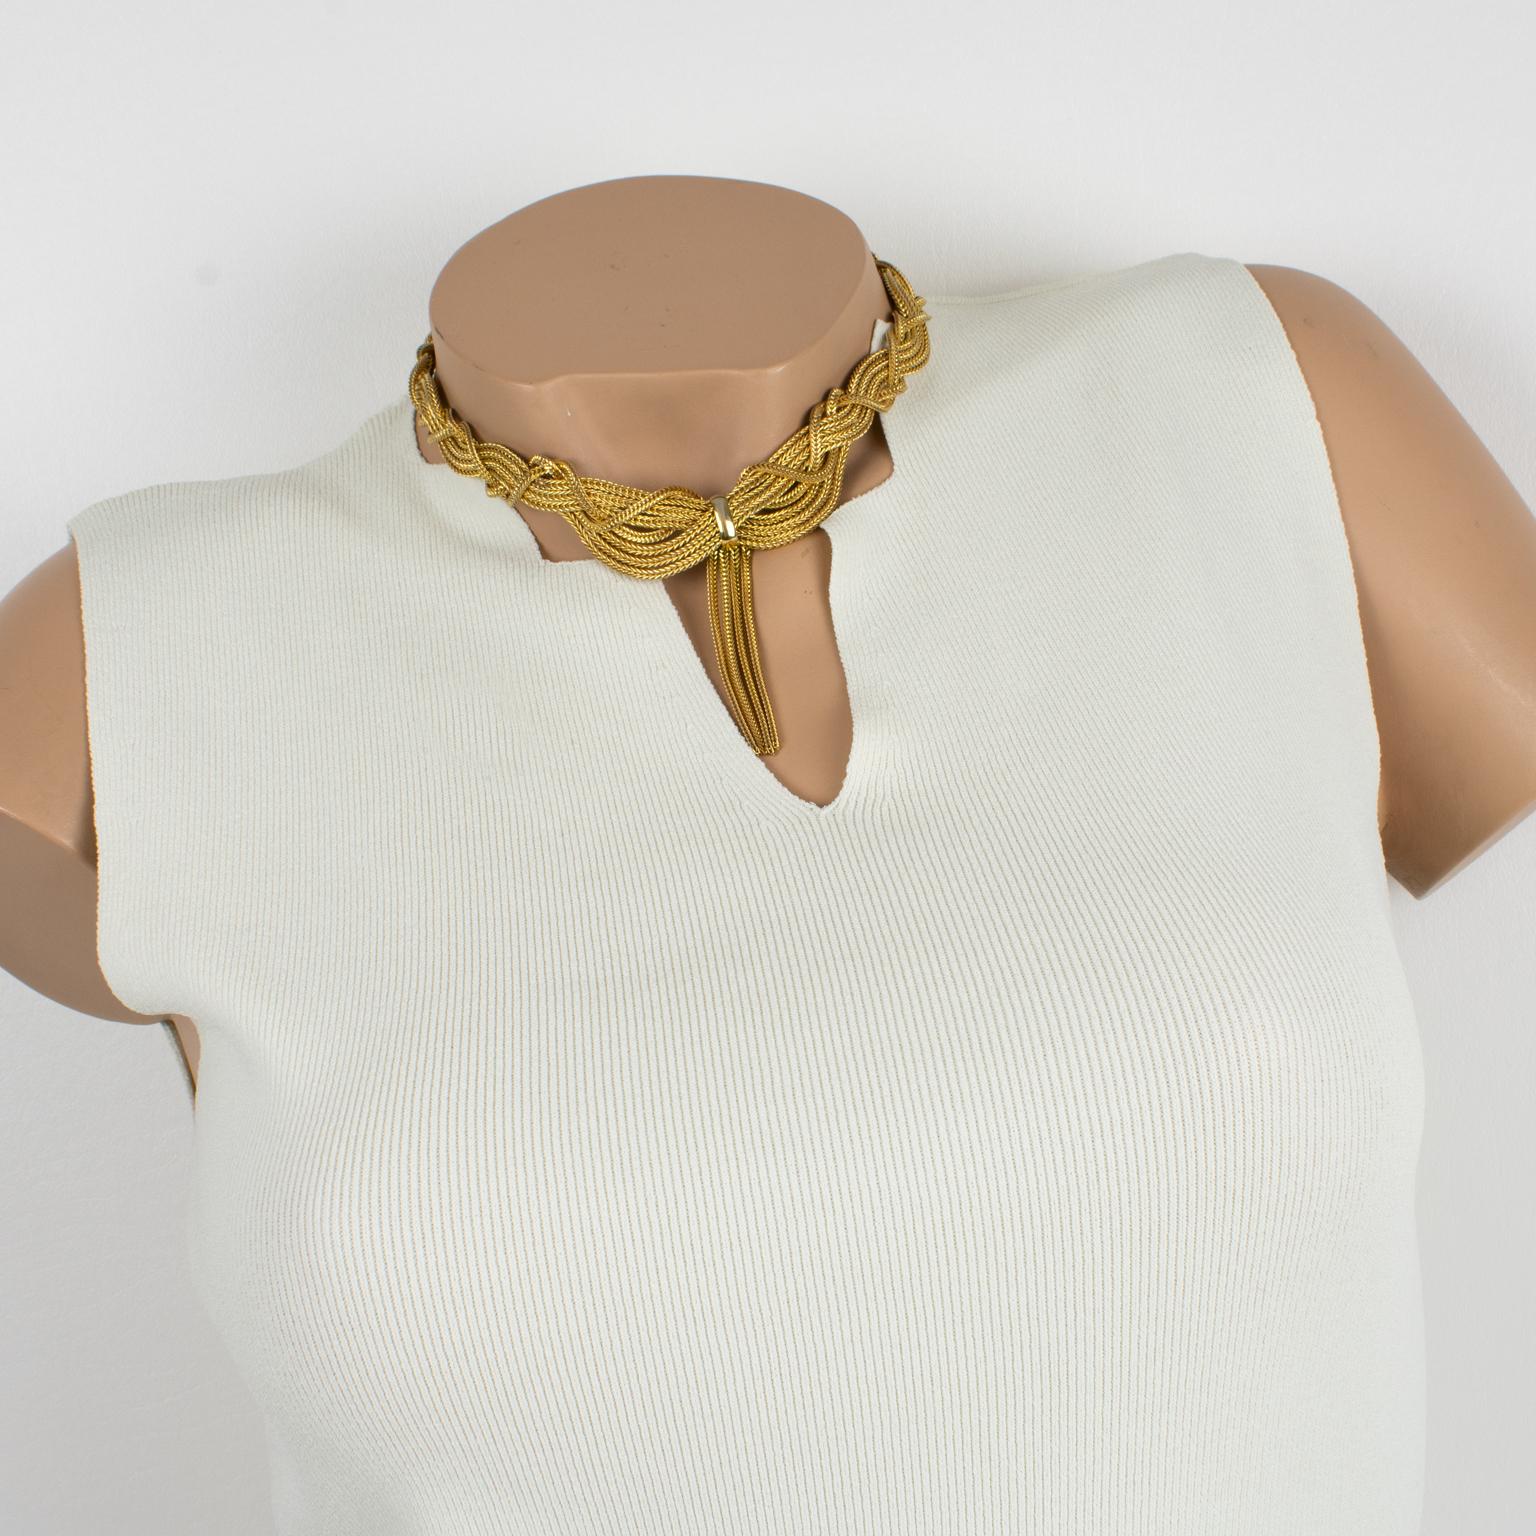 This stunning Christian Dior choker necklace was created and manufactured by Grosse in 1958. This piece was crafted by Henkel & Grosse for Christian Dior for their 1958 collections when Marc Bohan was Head Designer of the House. The choker boasts a